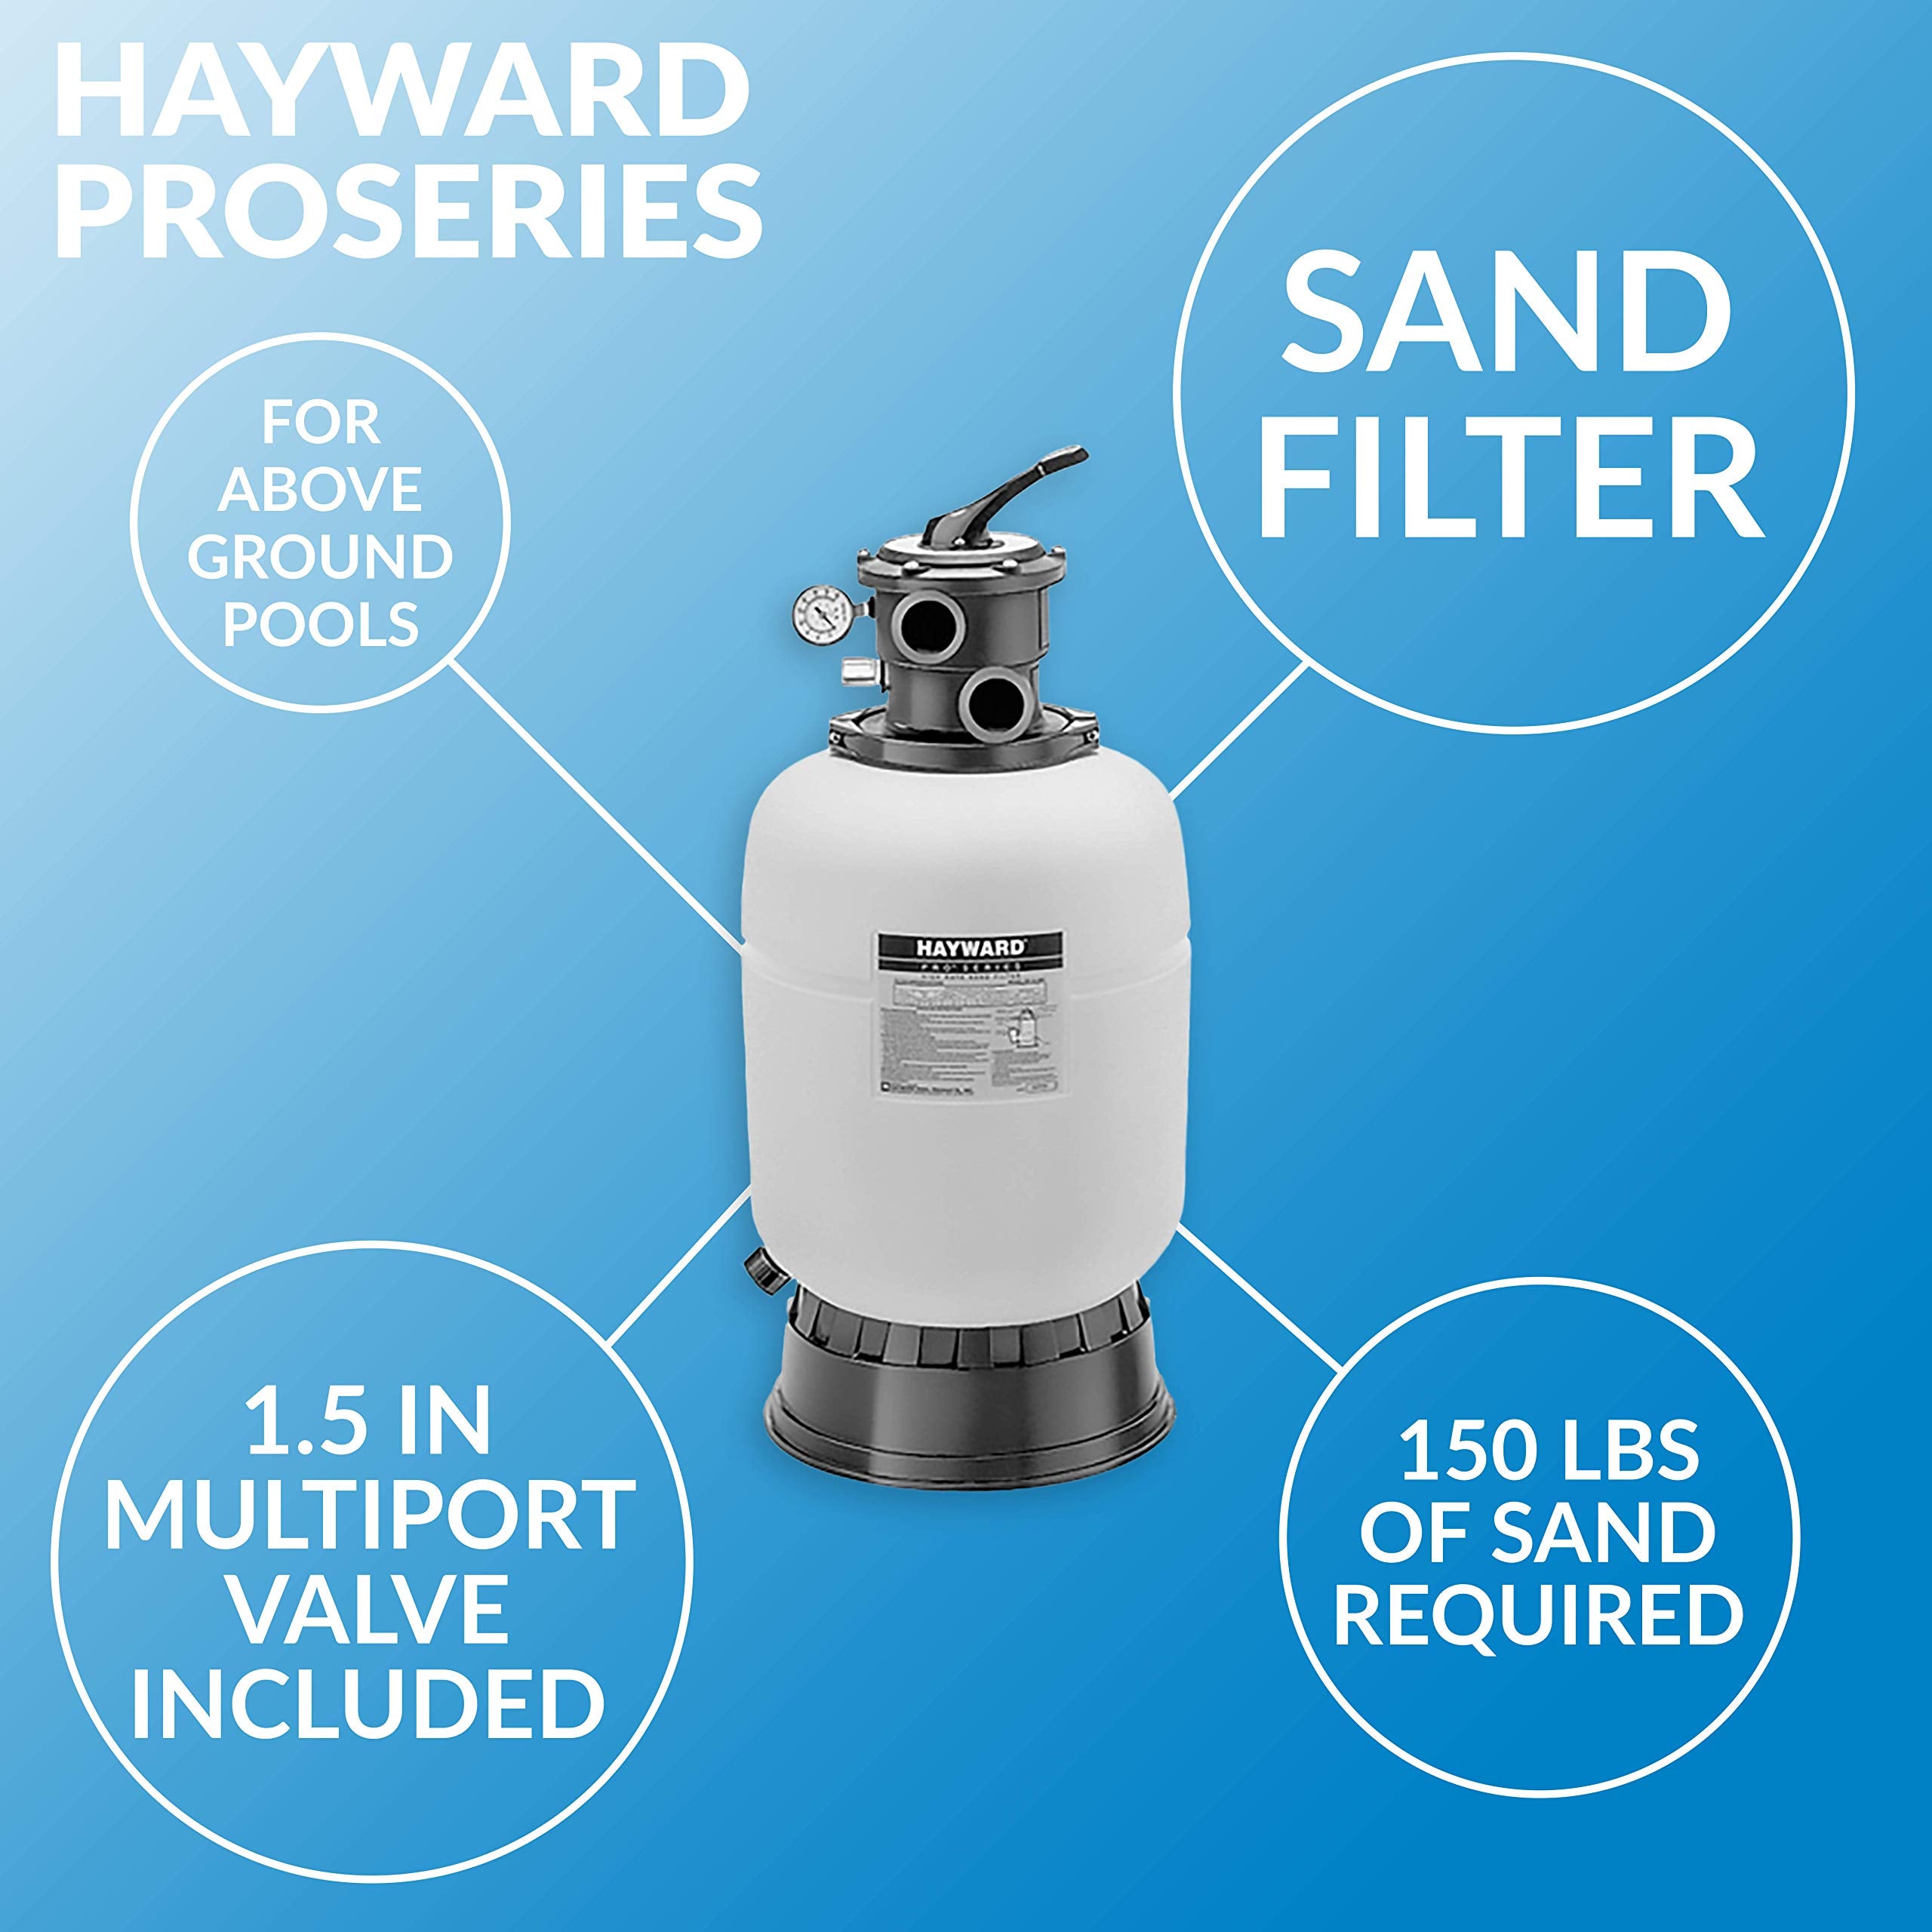 Hayward W3S180T93S ProSeries 18 In., 1.5 HP Sand Filter System for Above-Ground Pools